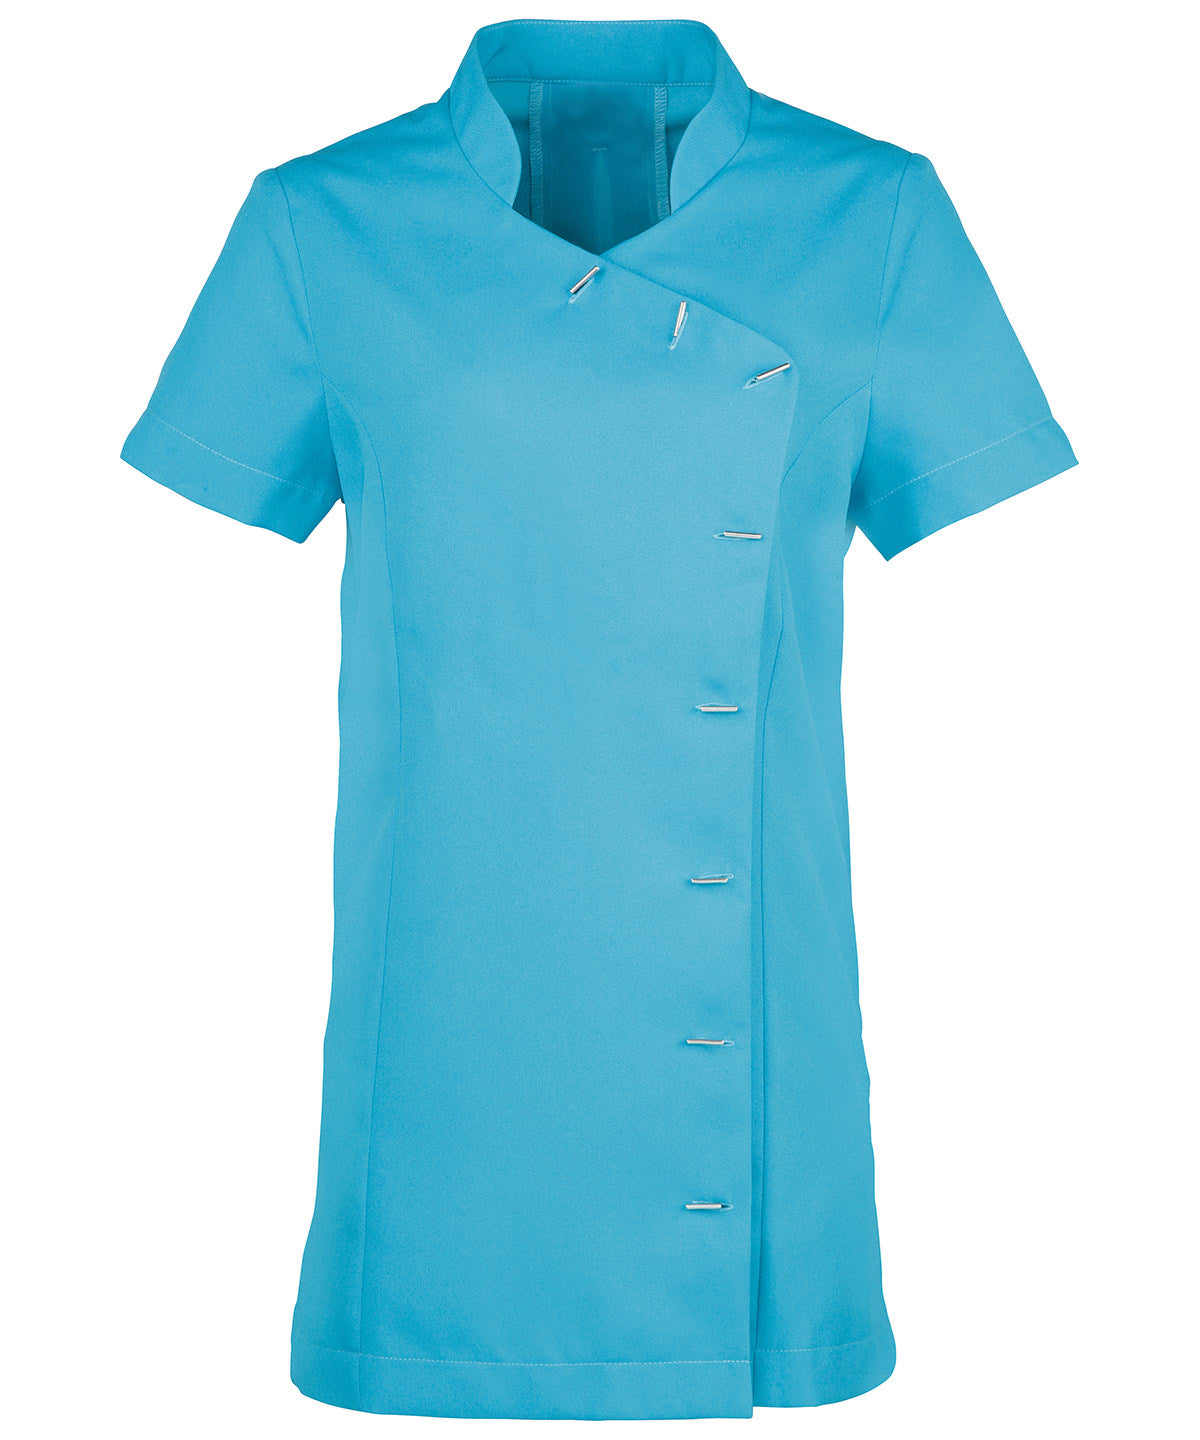 Premier Orchid beauty and spa tunic Turquoise